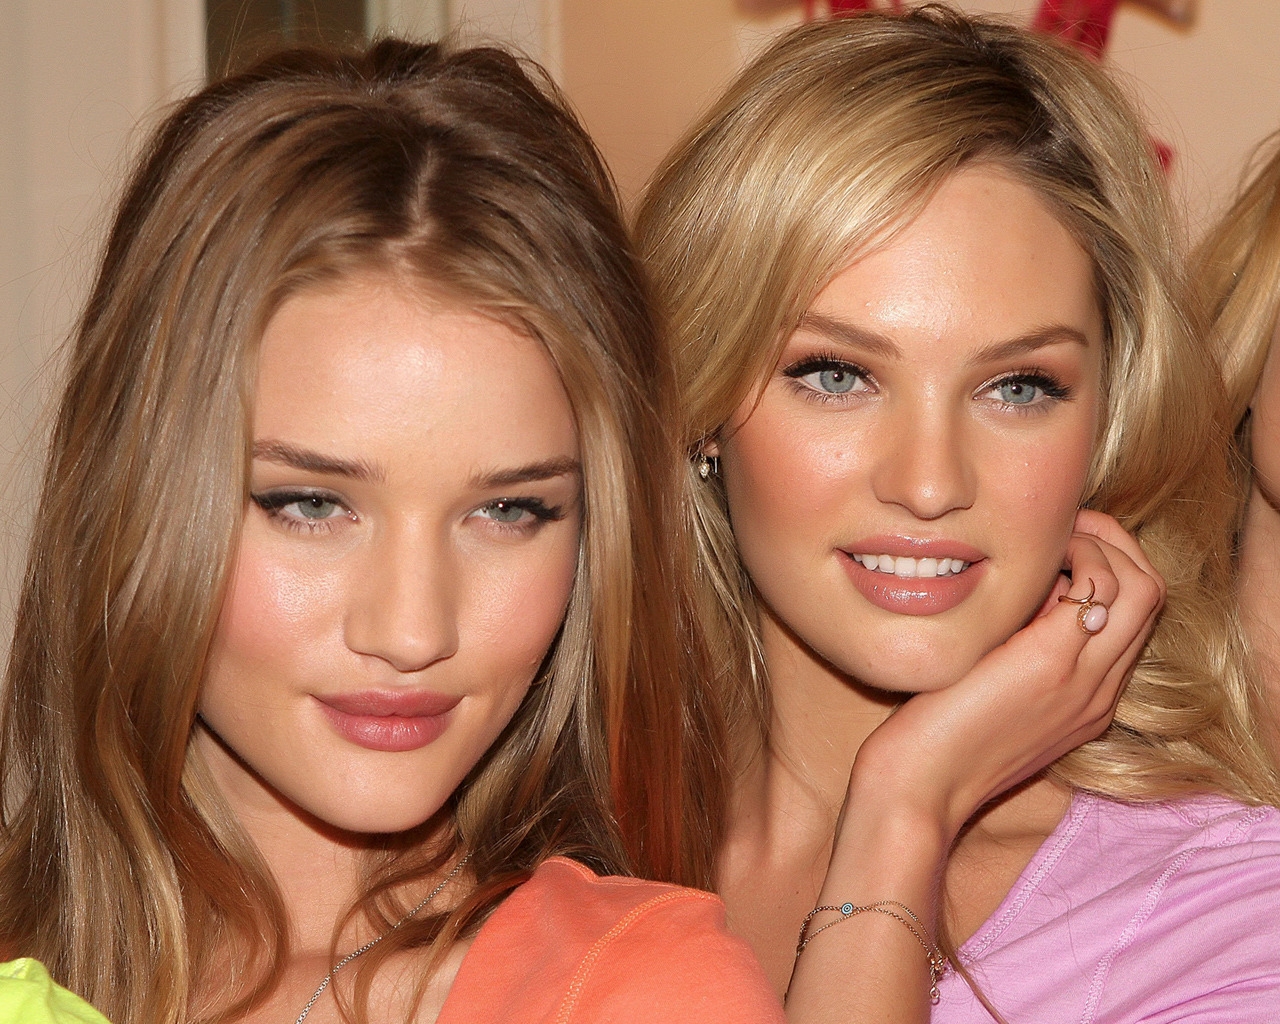 Rosie and Candice for 1280 x 1024 resolution